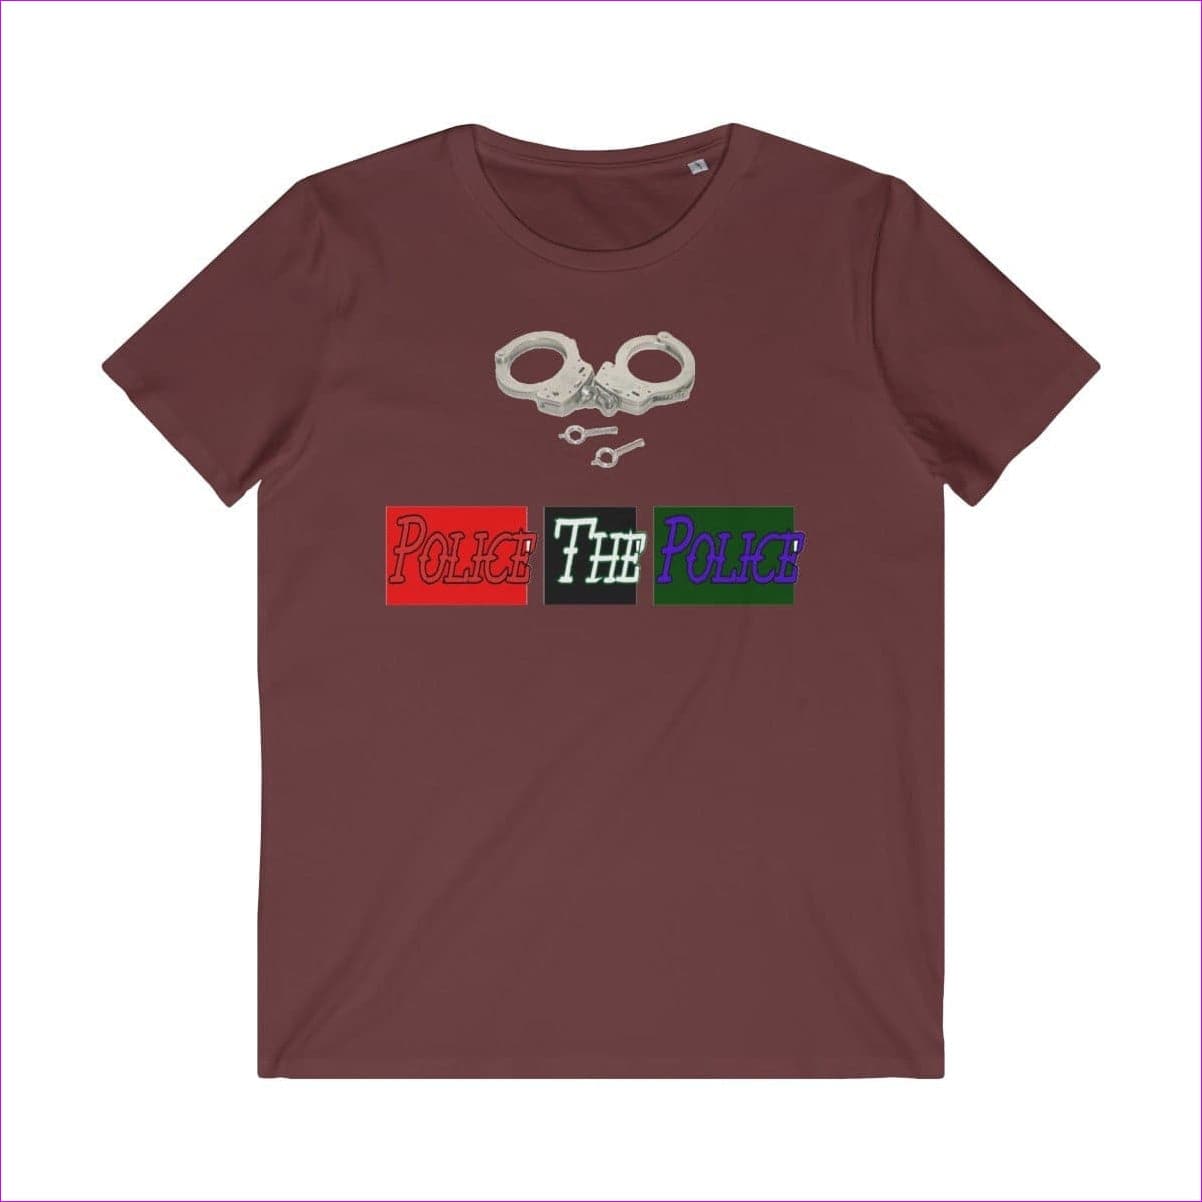 Burgundy - Police The Police Men's Organic Tee - Mens T-Shirt at TFC&H Co.